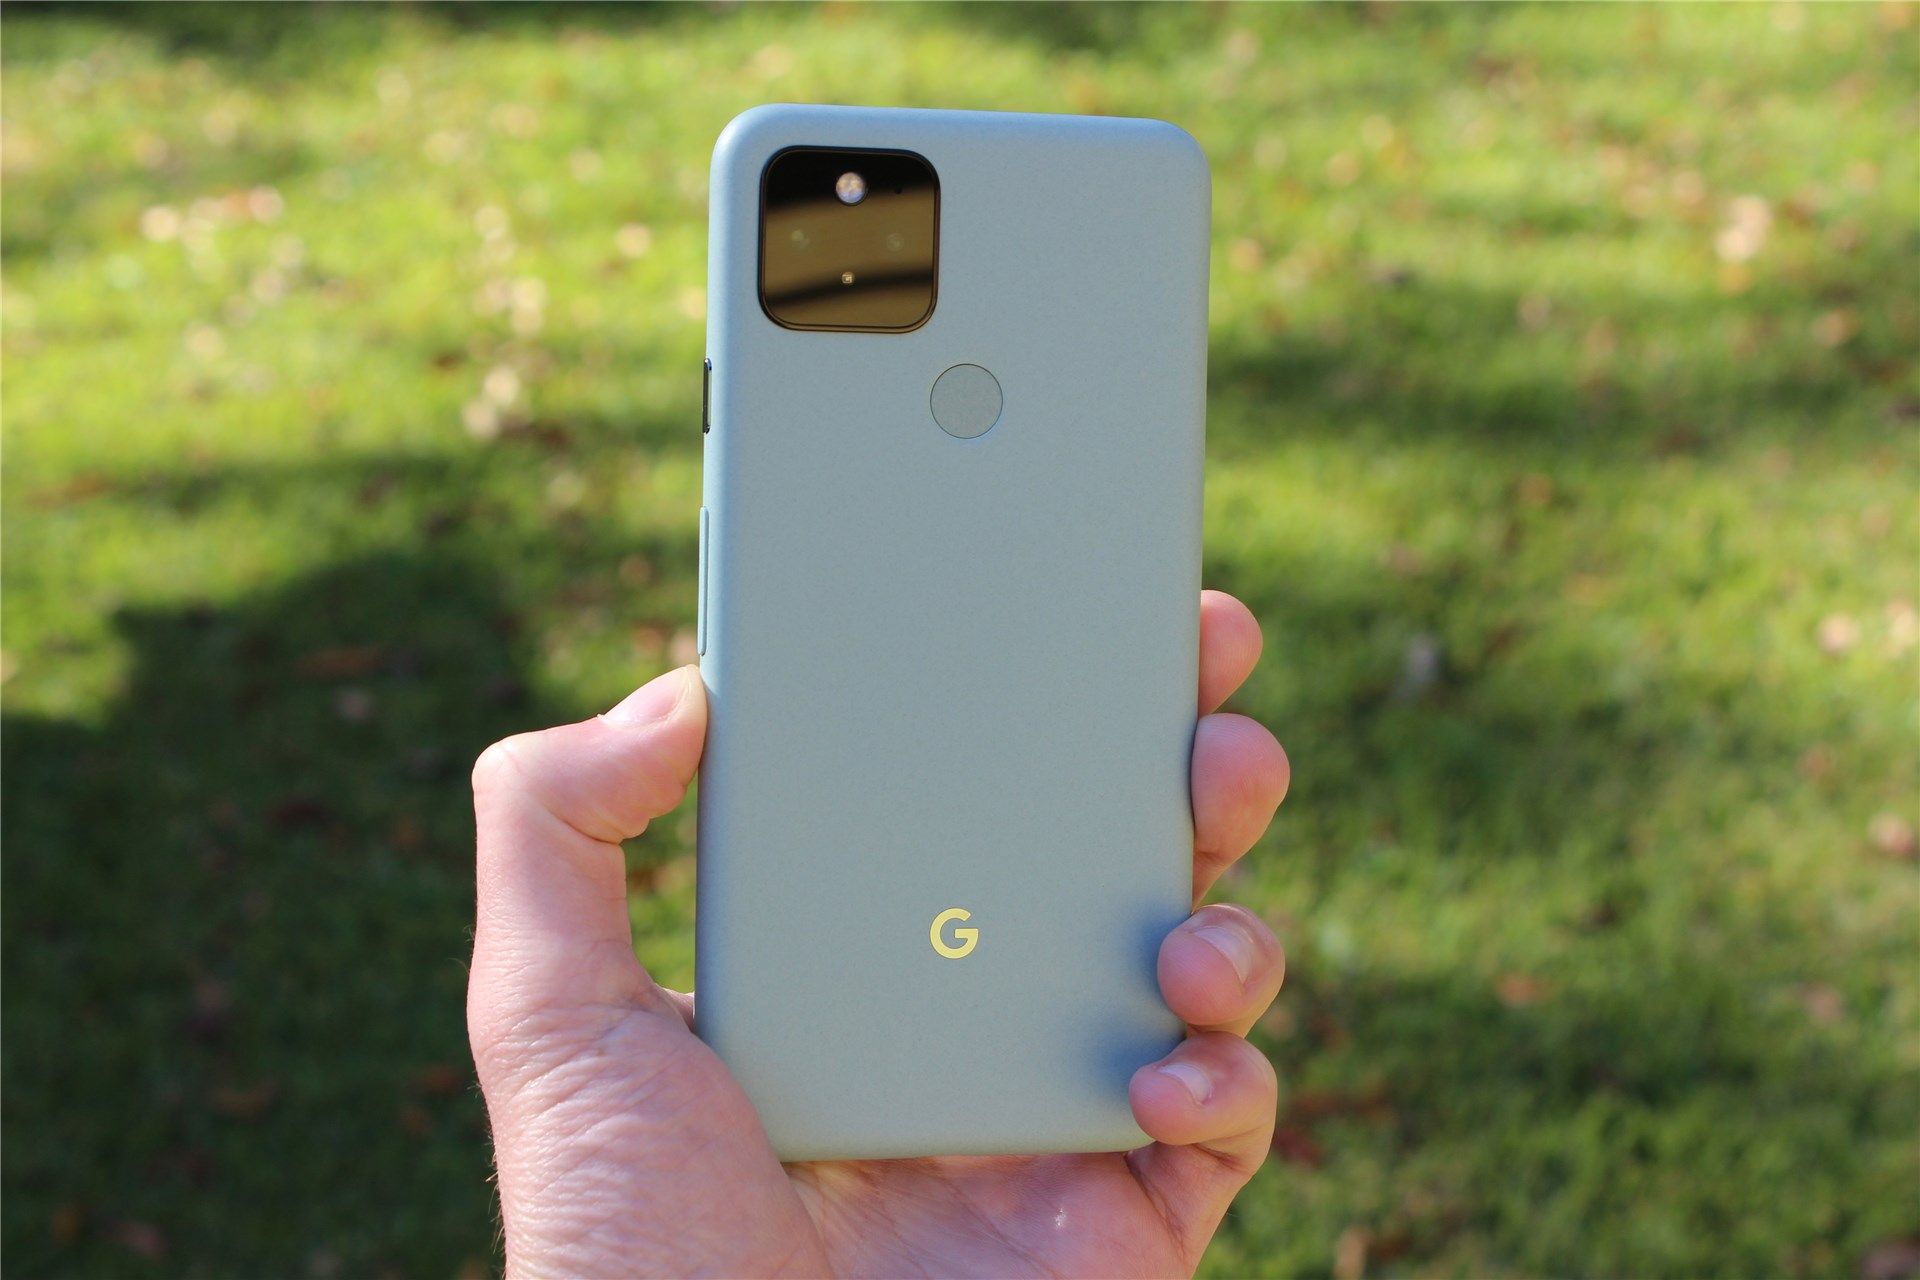 The Pixel 5 in Sage Green